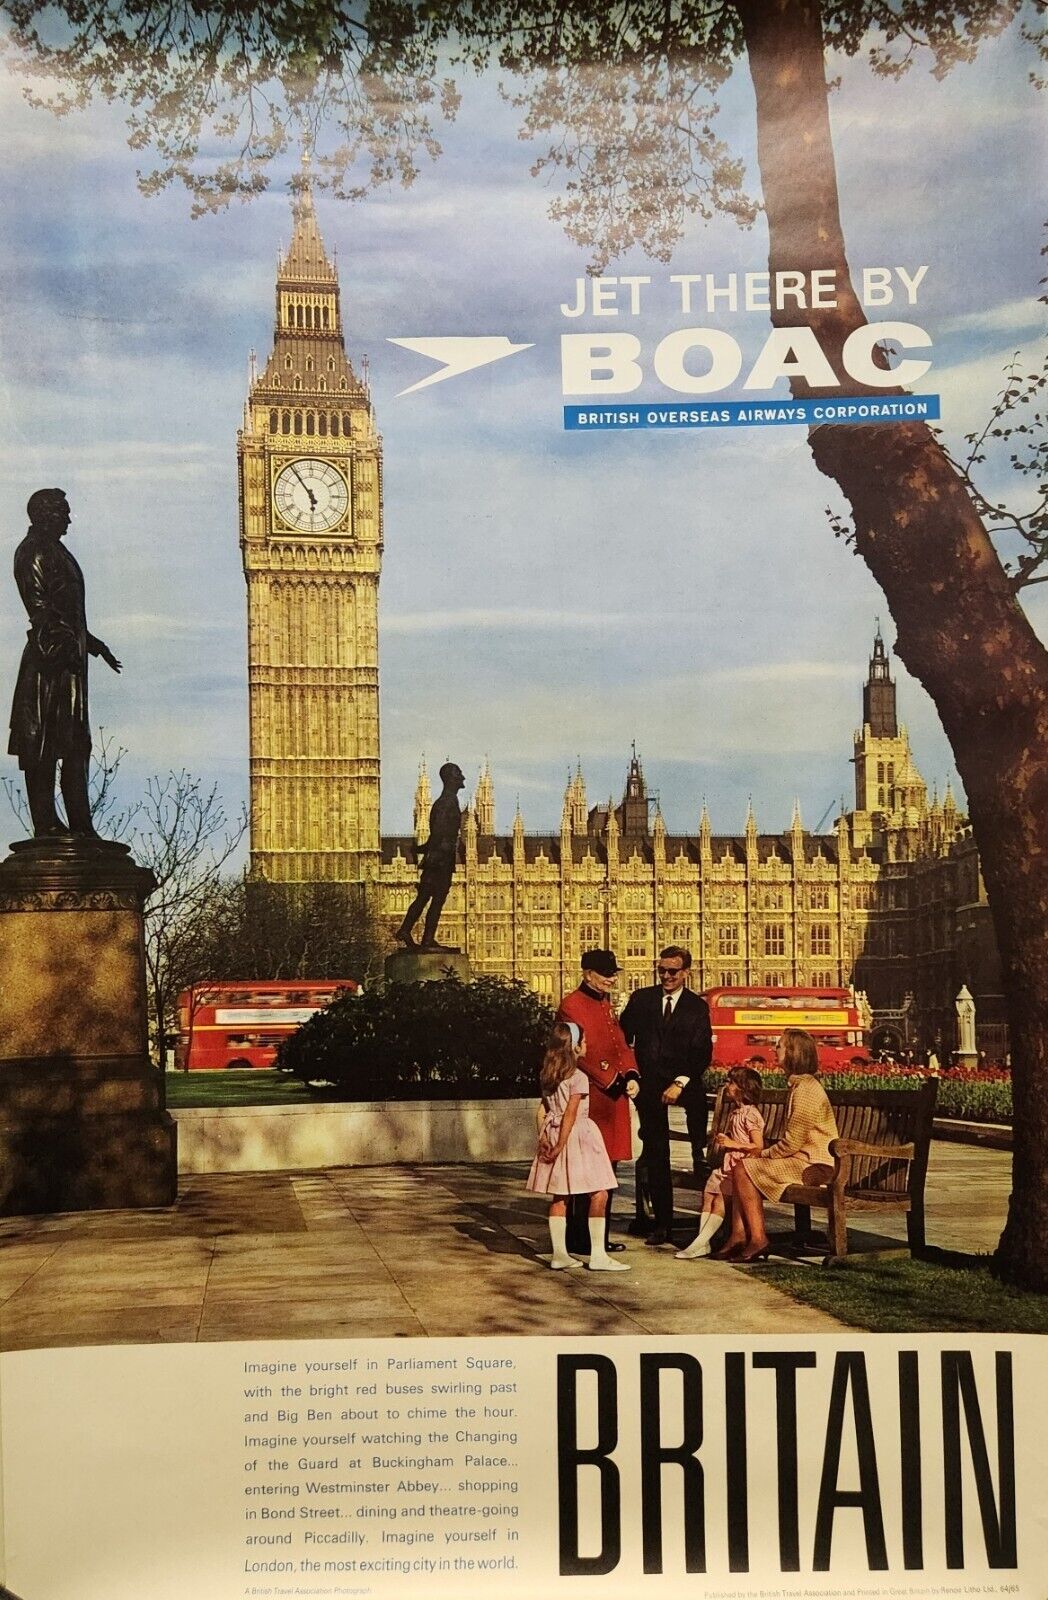 BOAC London British Airways Vintage 1965 Travel Poster Excellent New Old Stock